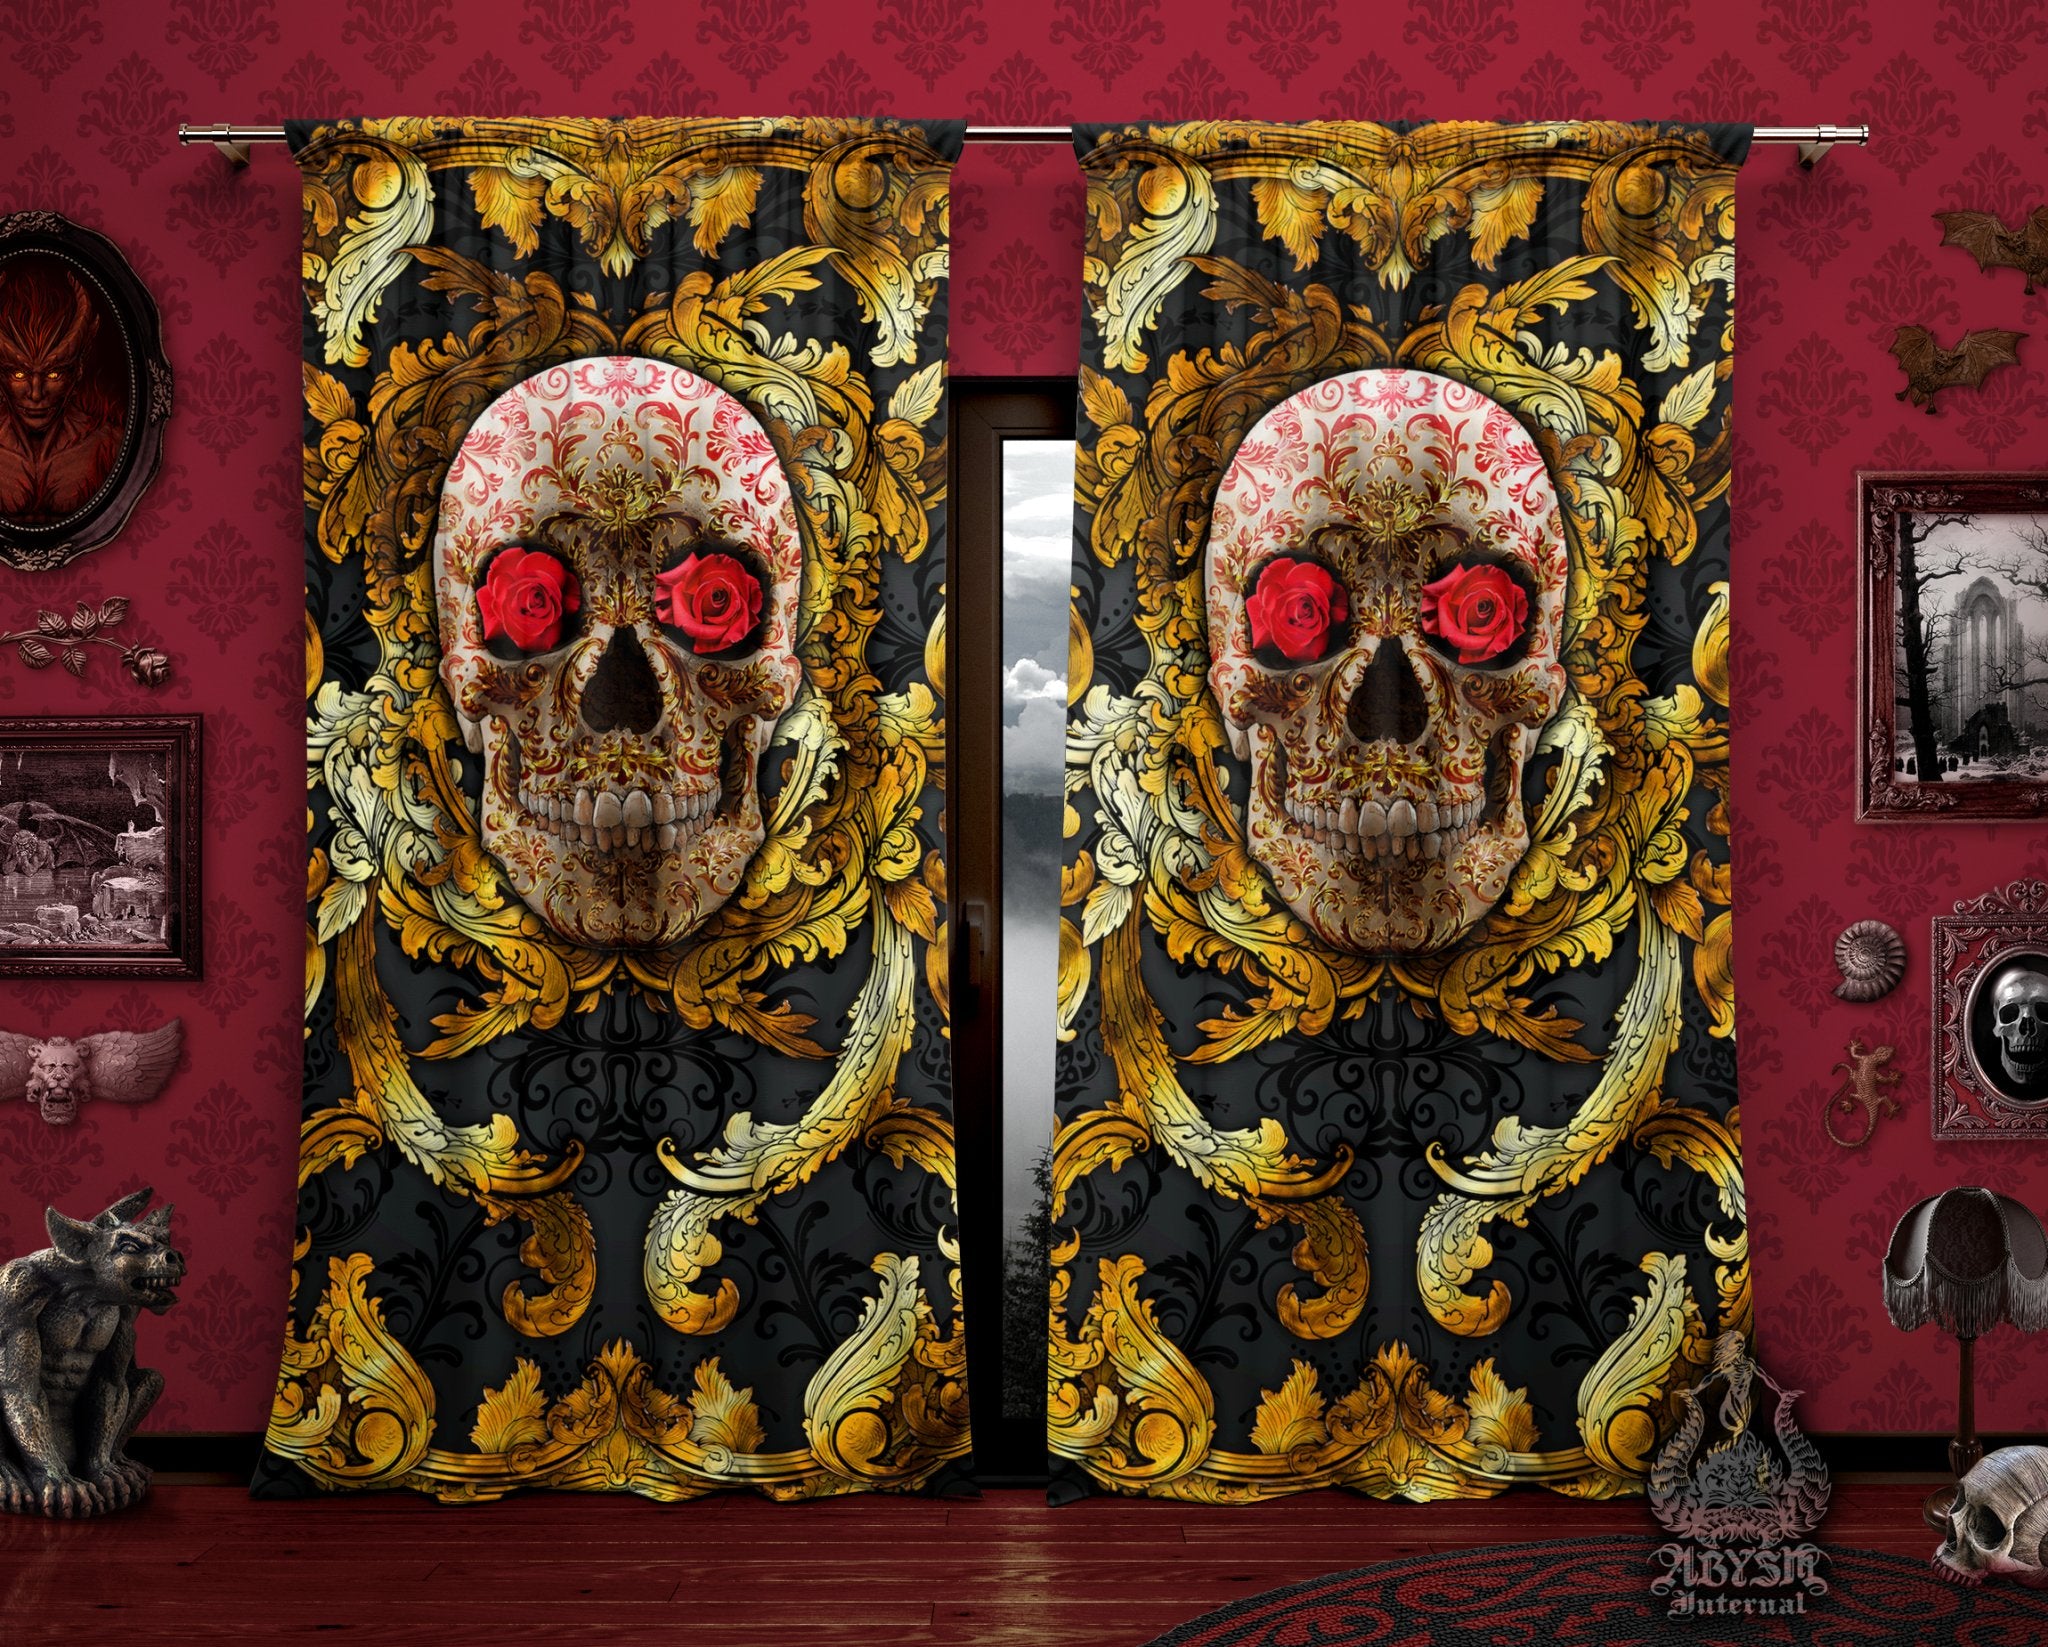 Gold Skull Curtains, 50x84' Printed Window Panels, Macabre Art Print, Victorian Goth Home Decor - Diamonds or Roses, 2 versions - Abysm Internal